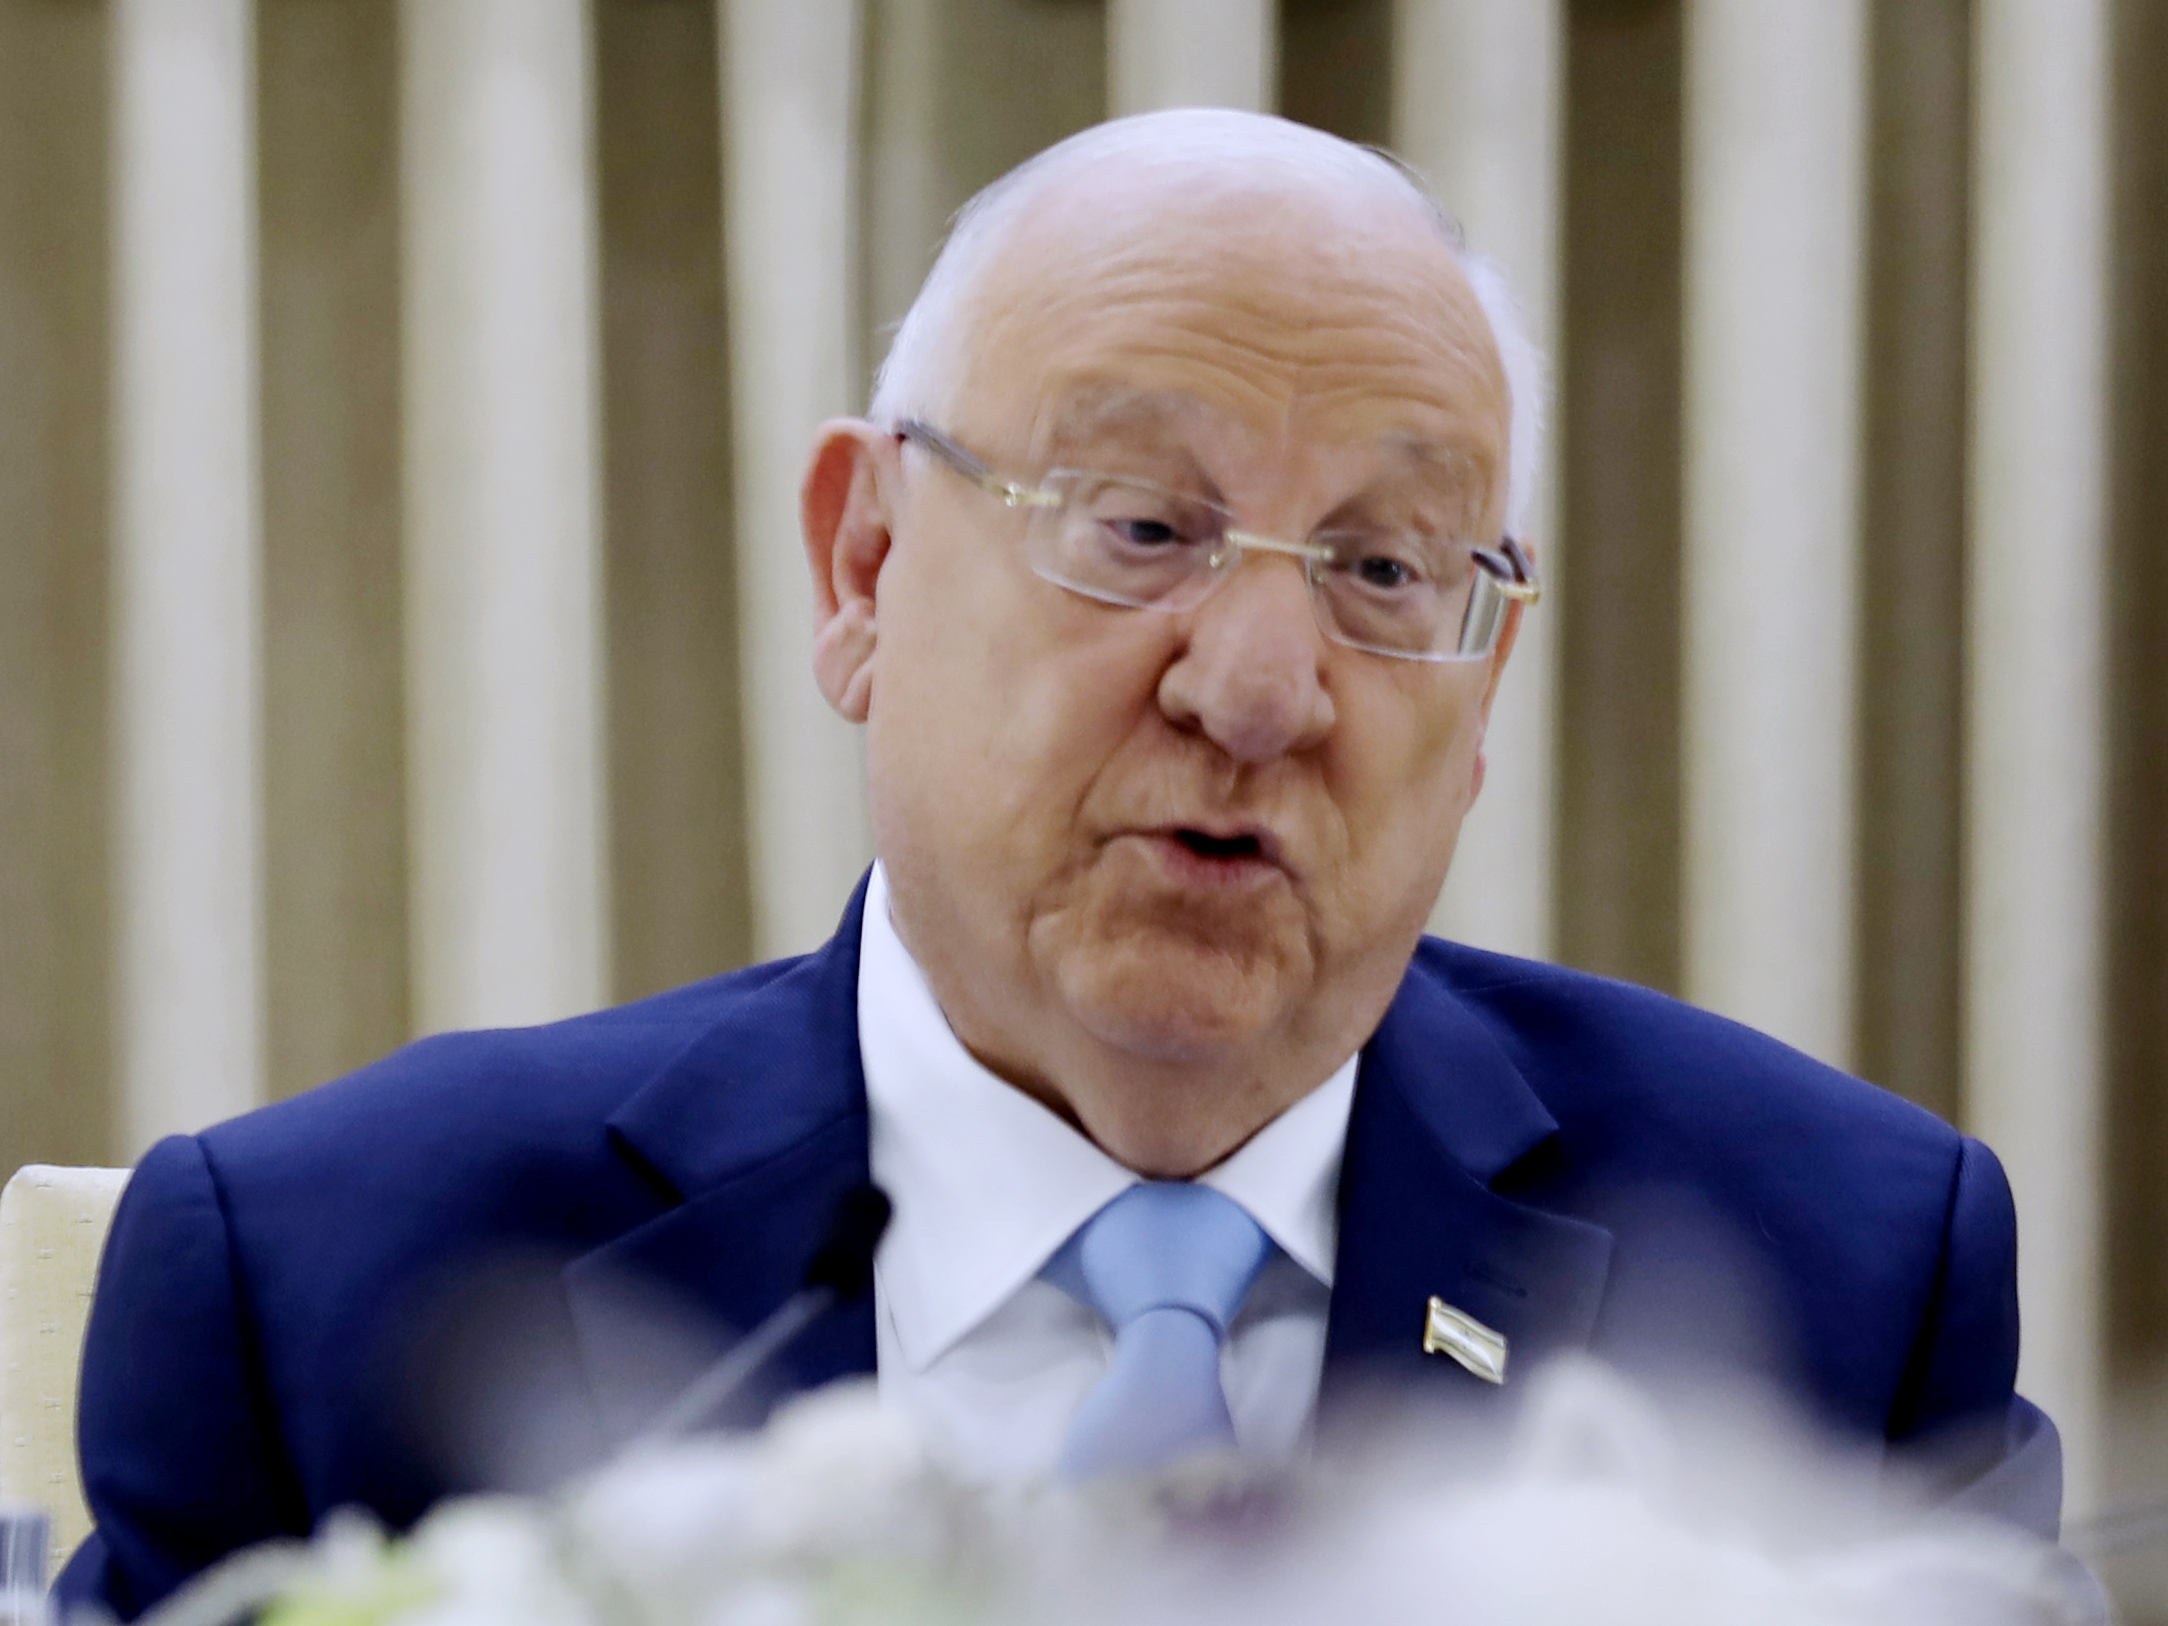 Israel’s Rivlin Mulls Tapping PM Tonight to Form Government - Bloomberg